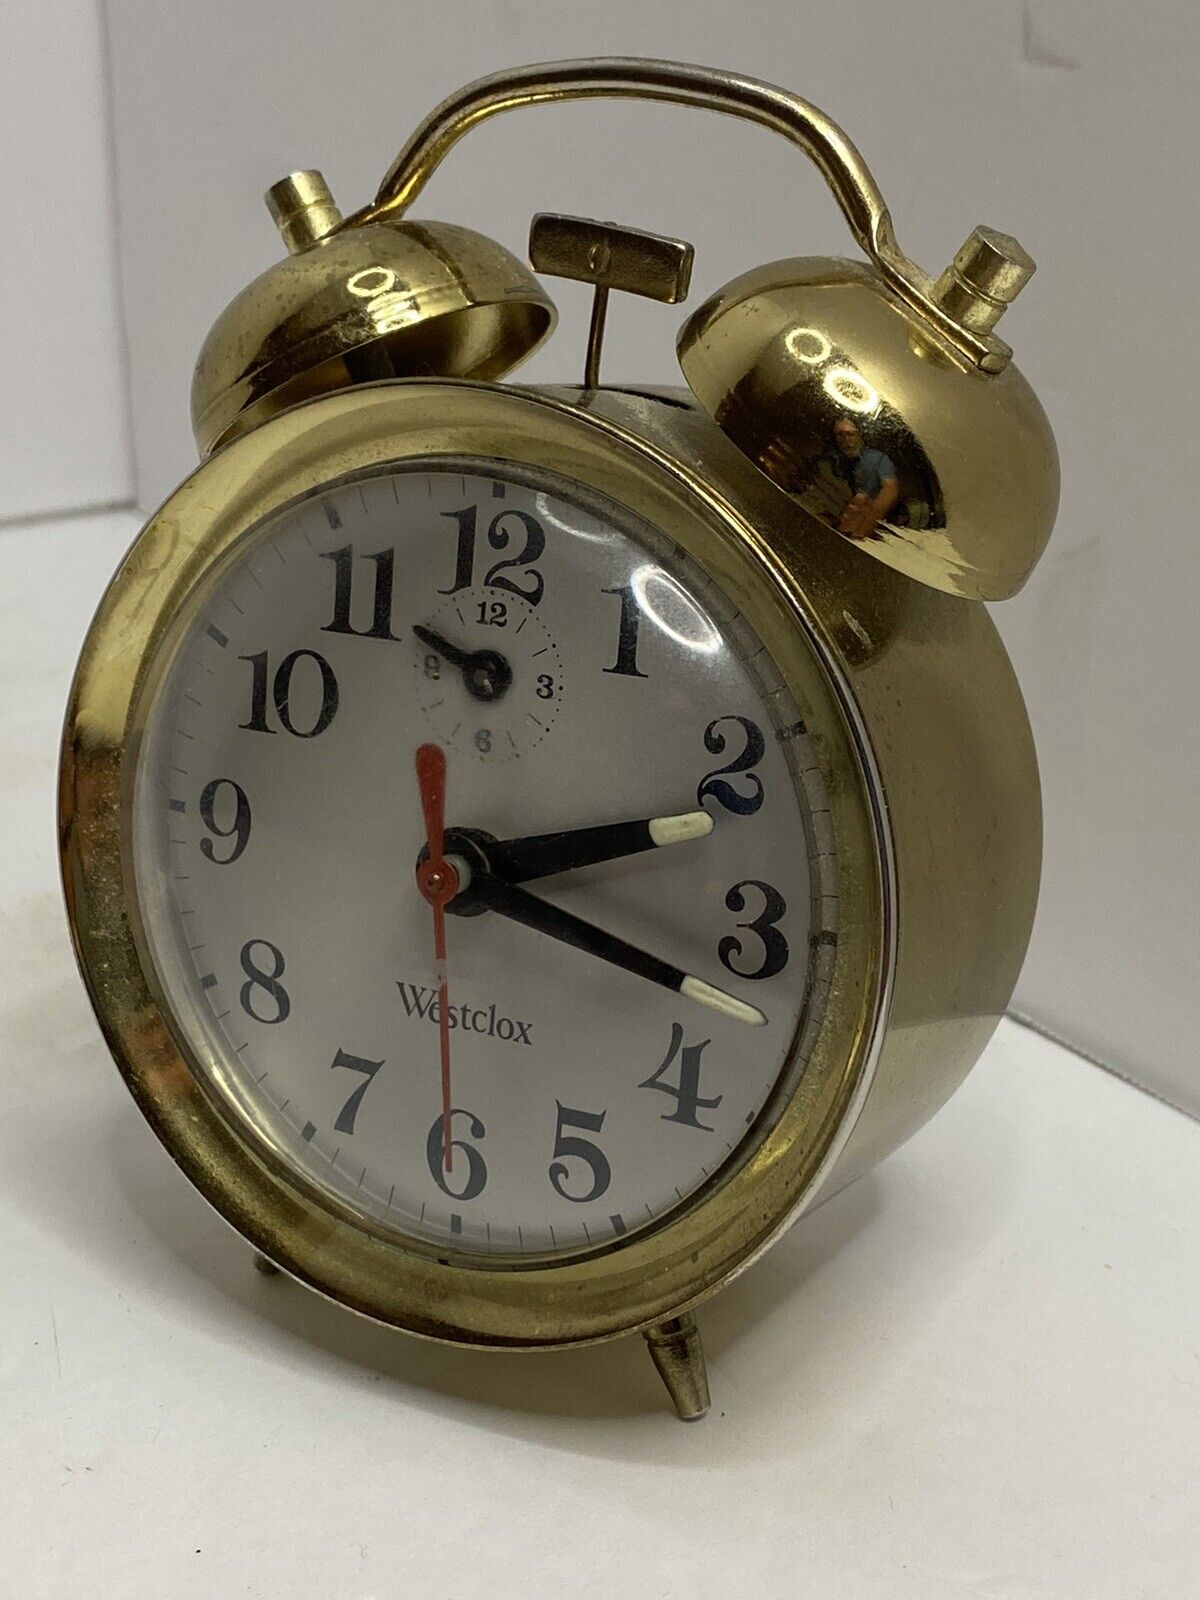 Vintage Gold Tone Westclox - Double Bell Alarm Clock - with Handle. Manual Wind